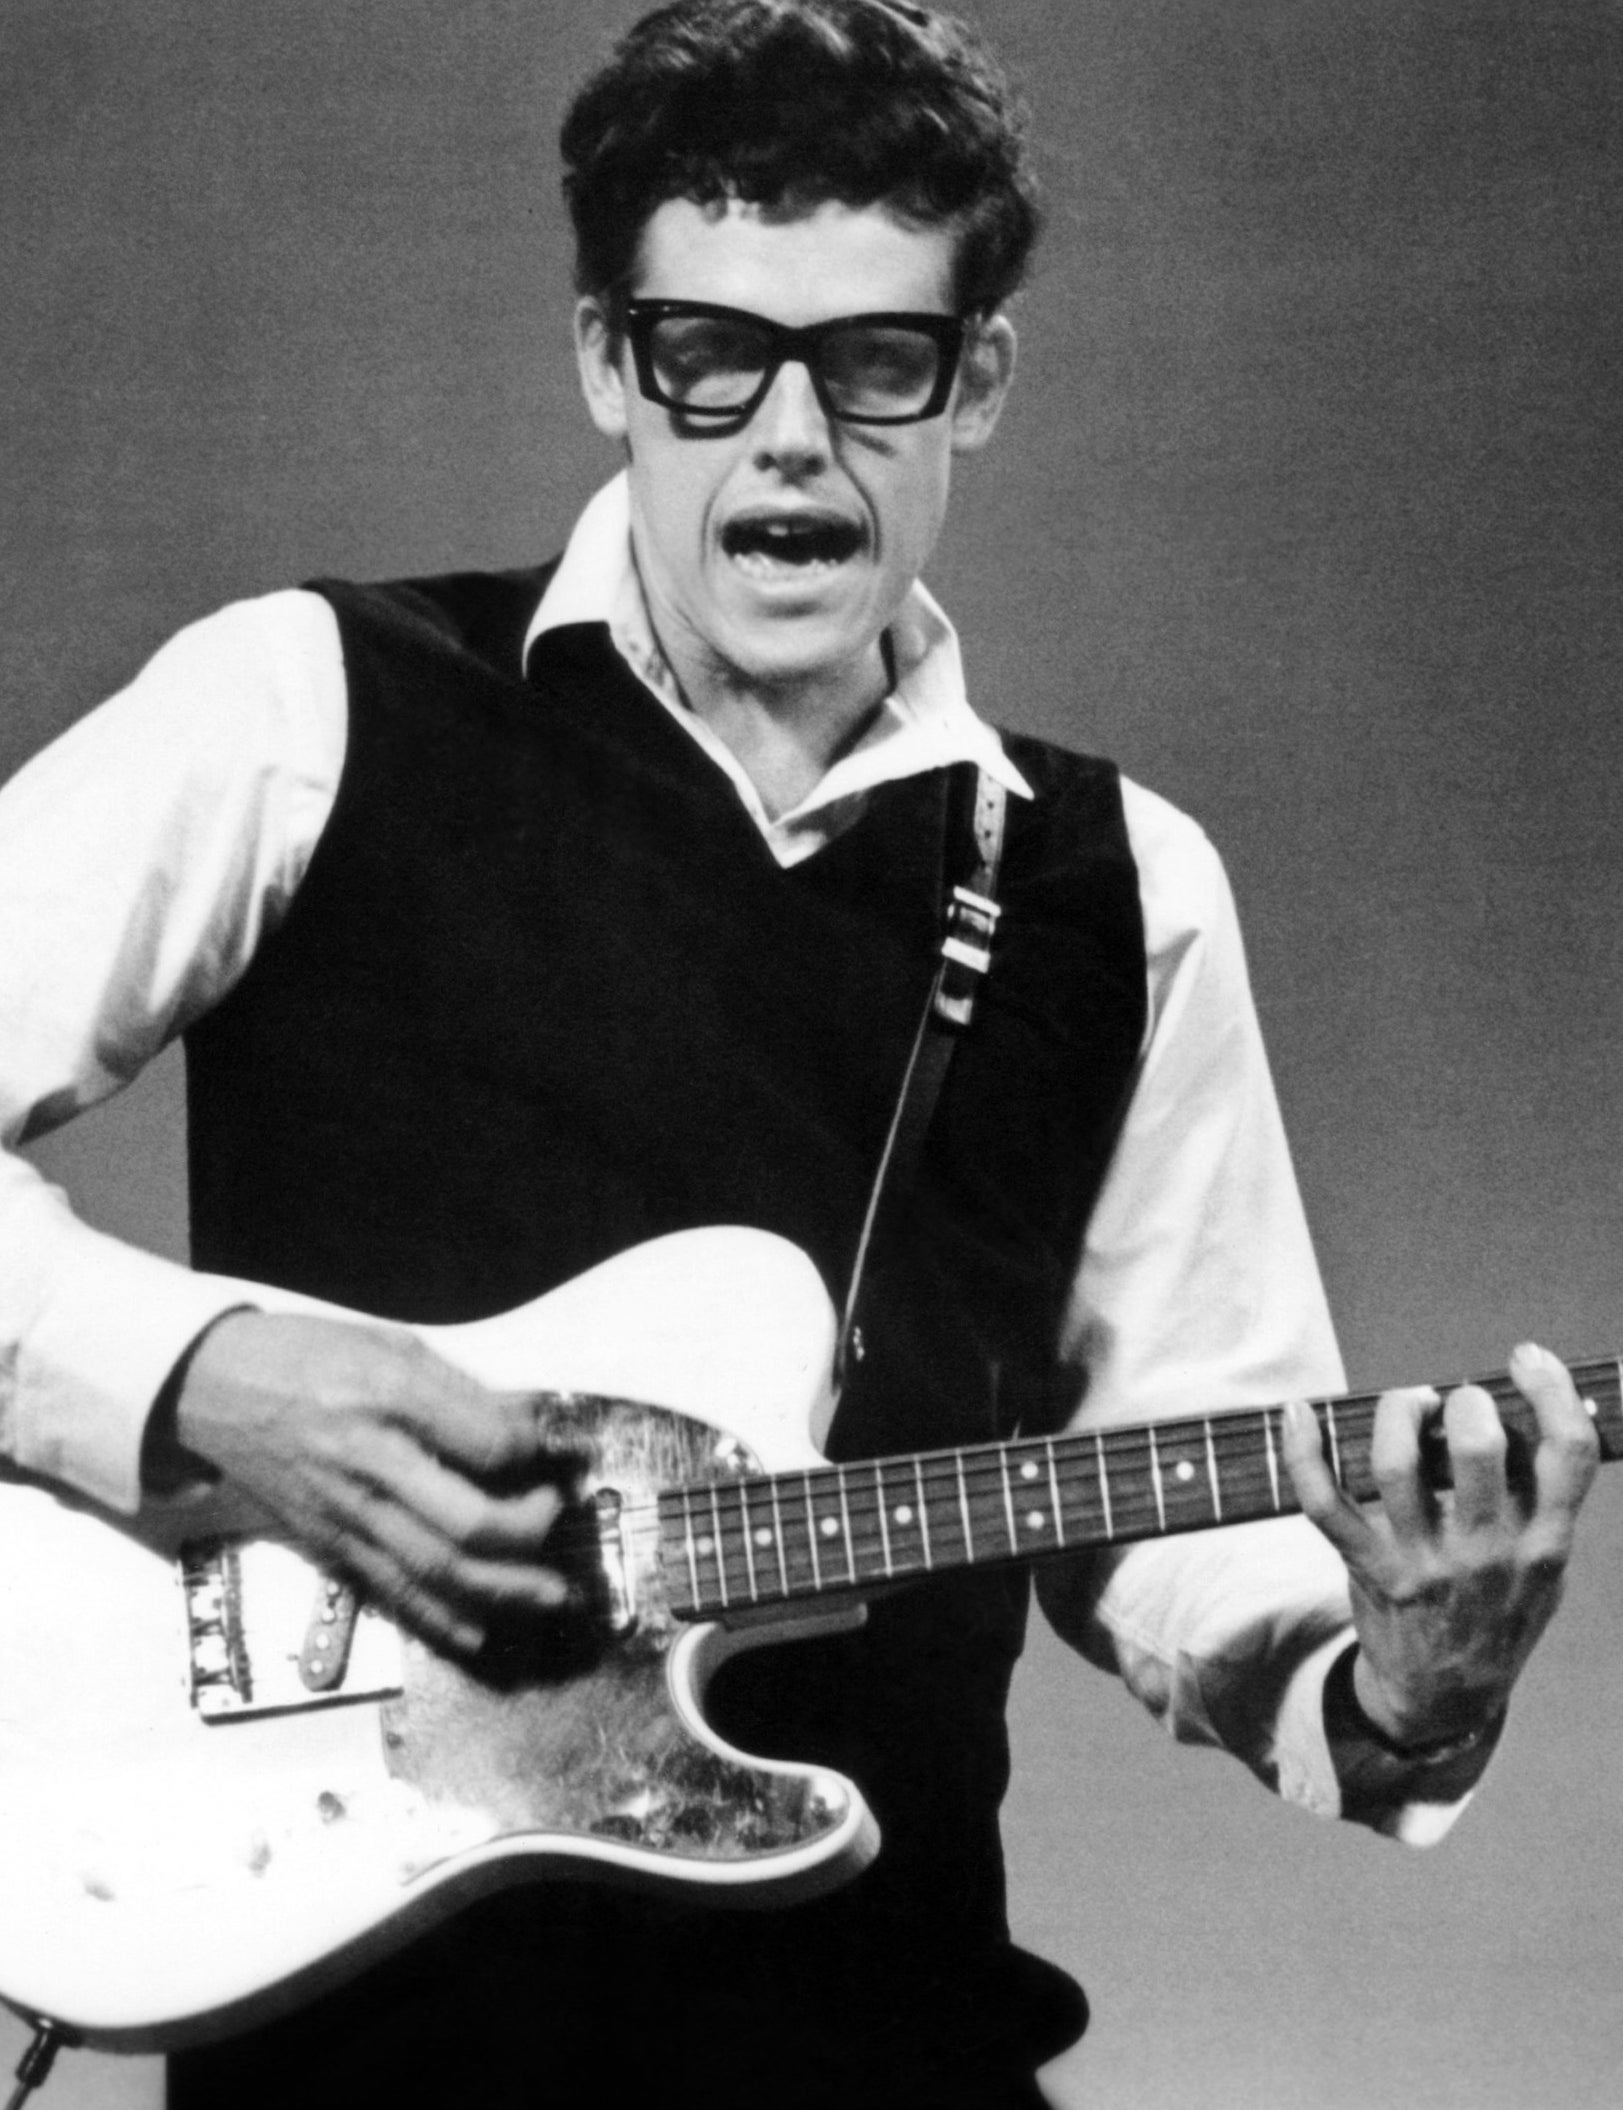 Gary Busey playing guitar and dressed like Buddy Holly